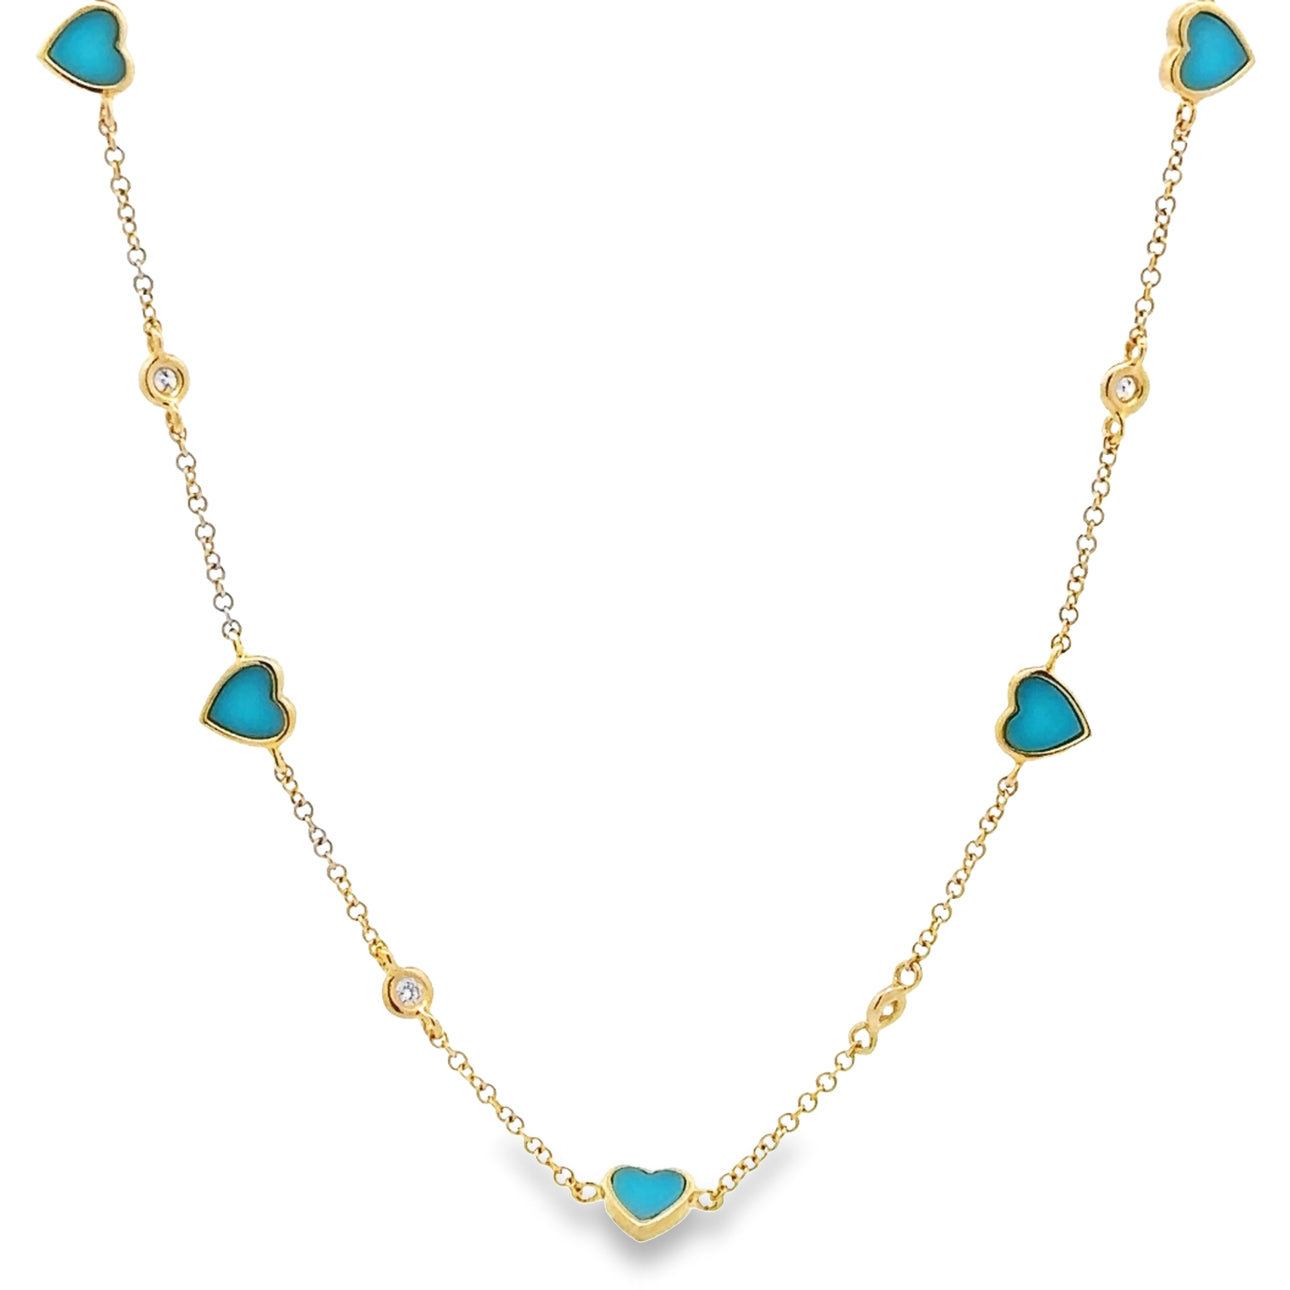 WD1333 14kt Gold Turquoise Heart Necklace with Diamond Detail